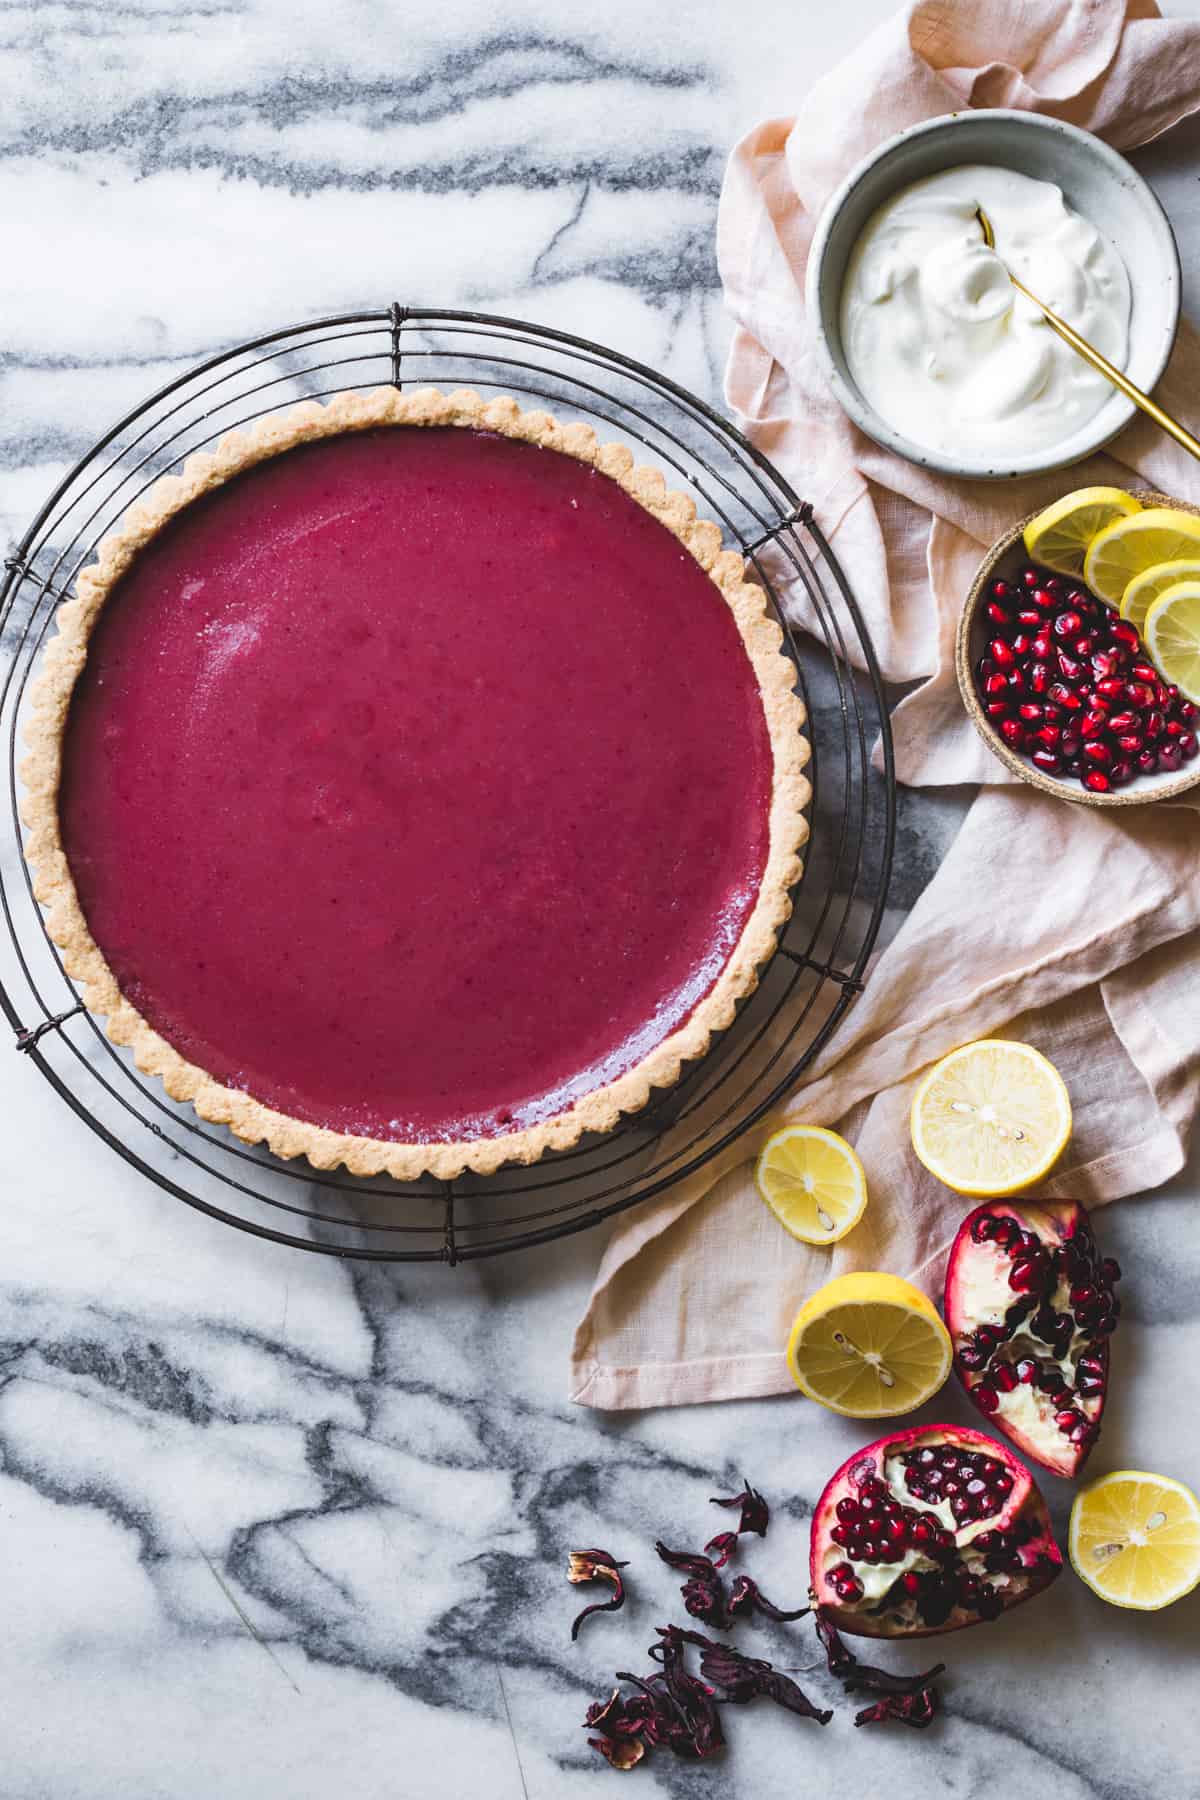 Pomegranate Tart with Hibiscus, Lemon, and Almond Flour Crust {gluten-free} before cream topping 